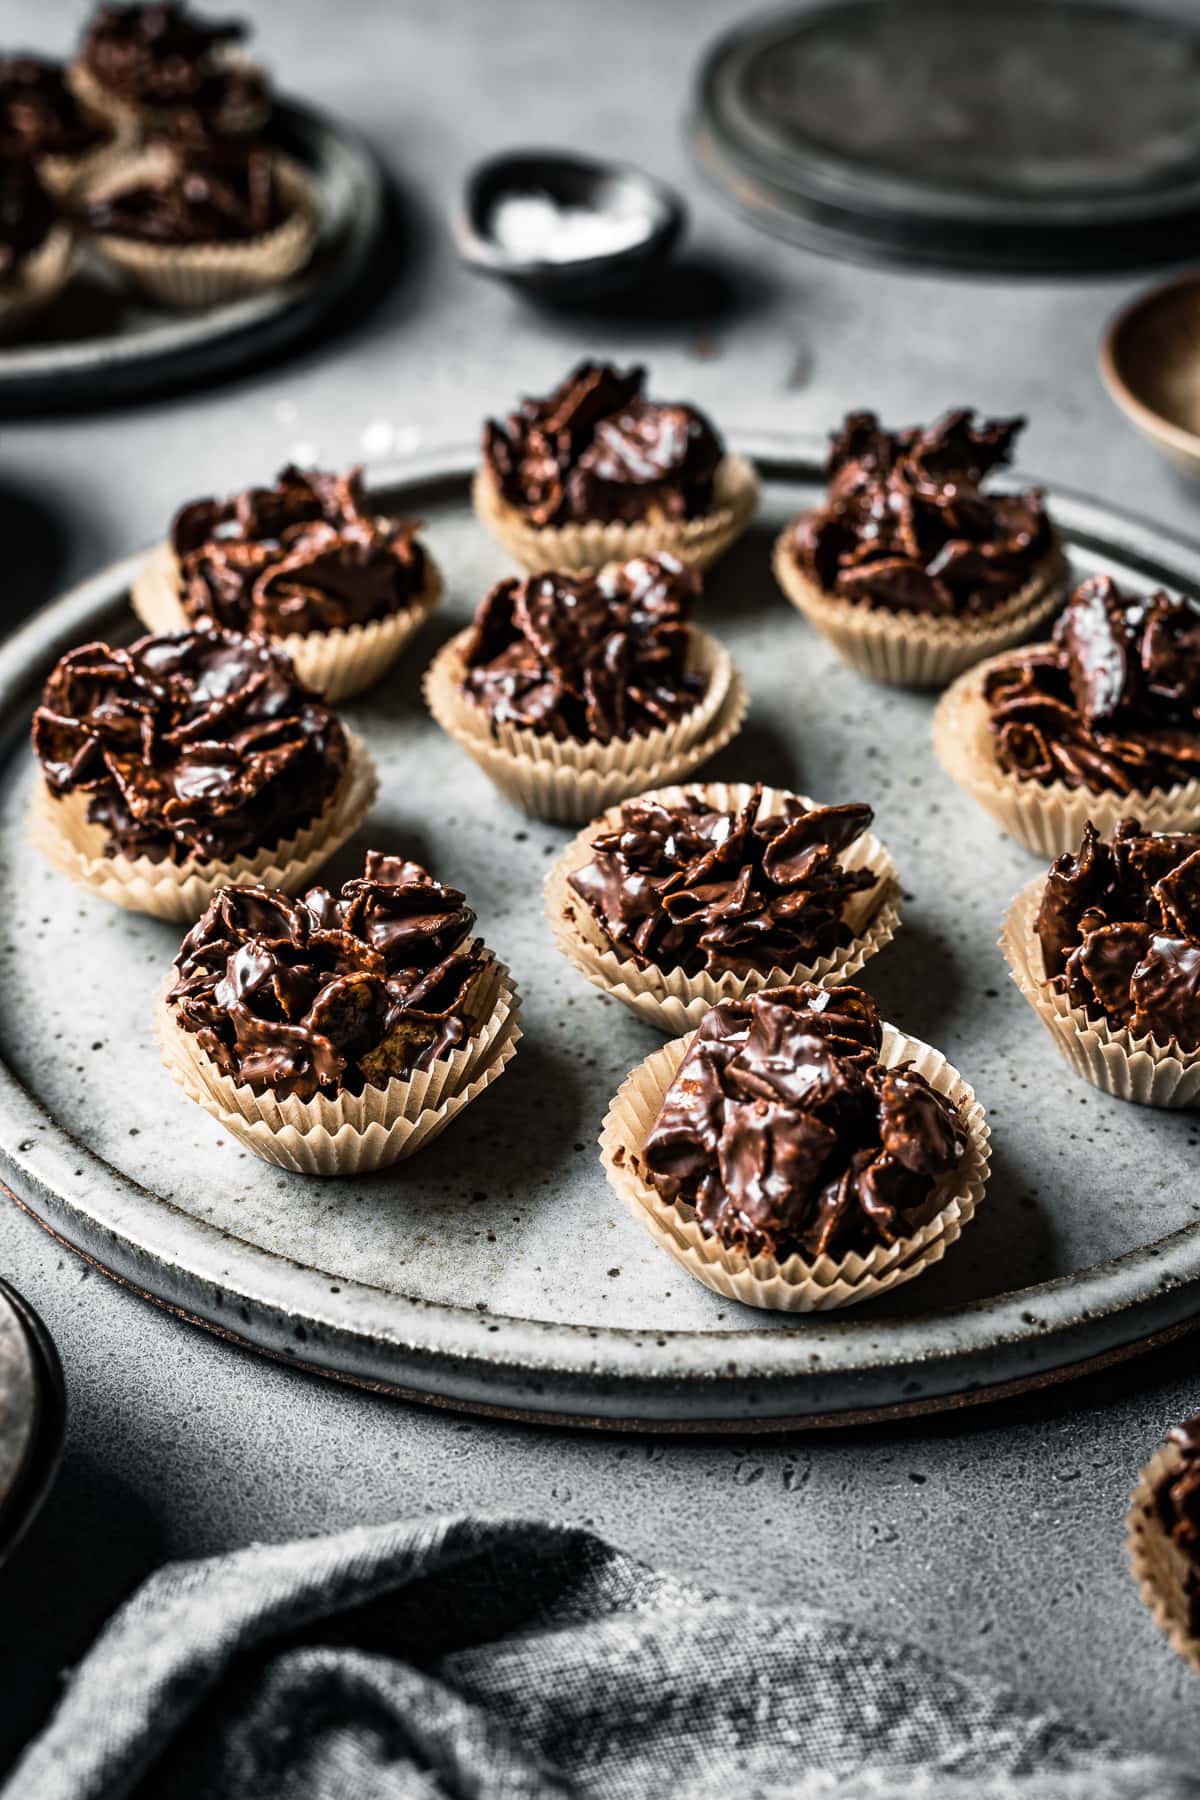 A slde view of a large speckled grey ceramic plate holds chocolate covered cornflake cereal in doubled up mini brown paper cupcake liners. They rest on a grey stone surface and are surrounded bya grey linen napkin, a pinch bowl of flaky salt and another plate of candies.